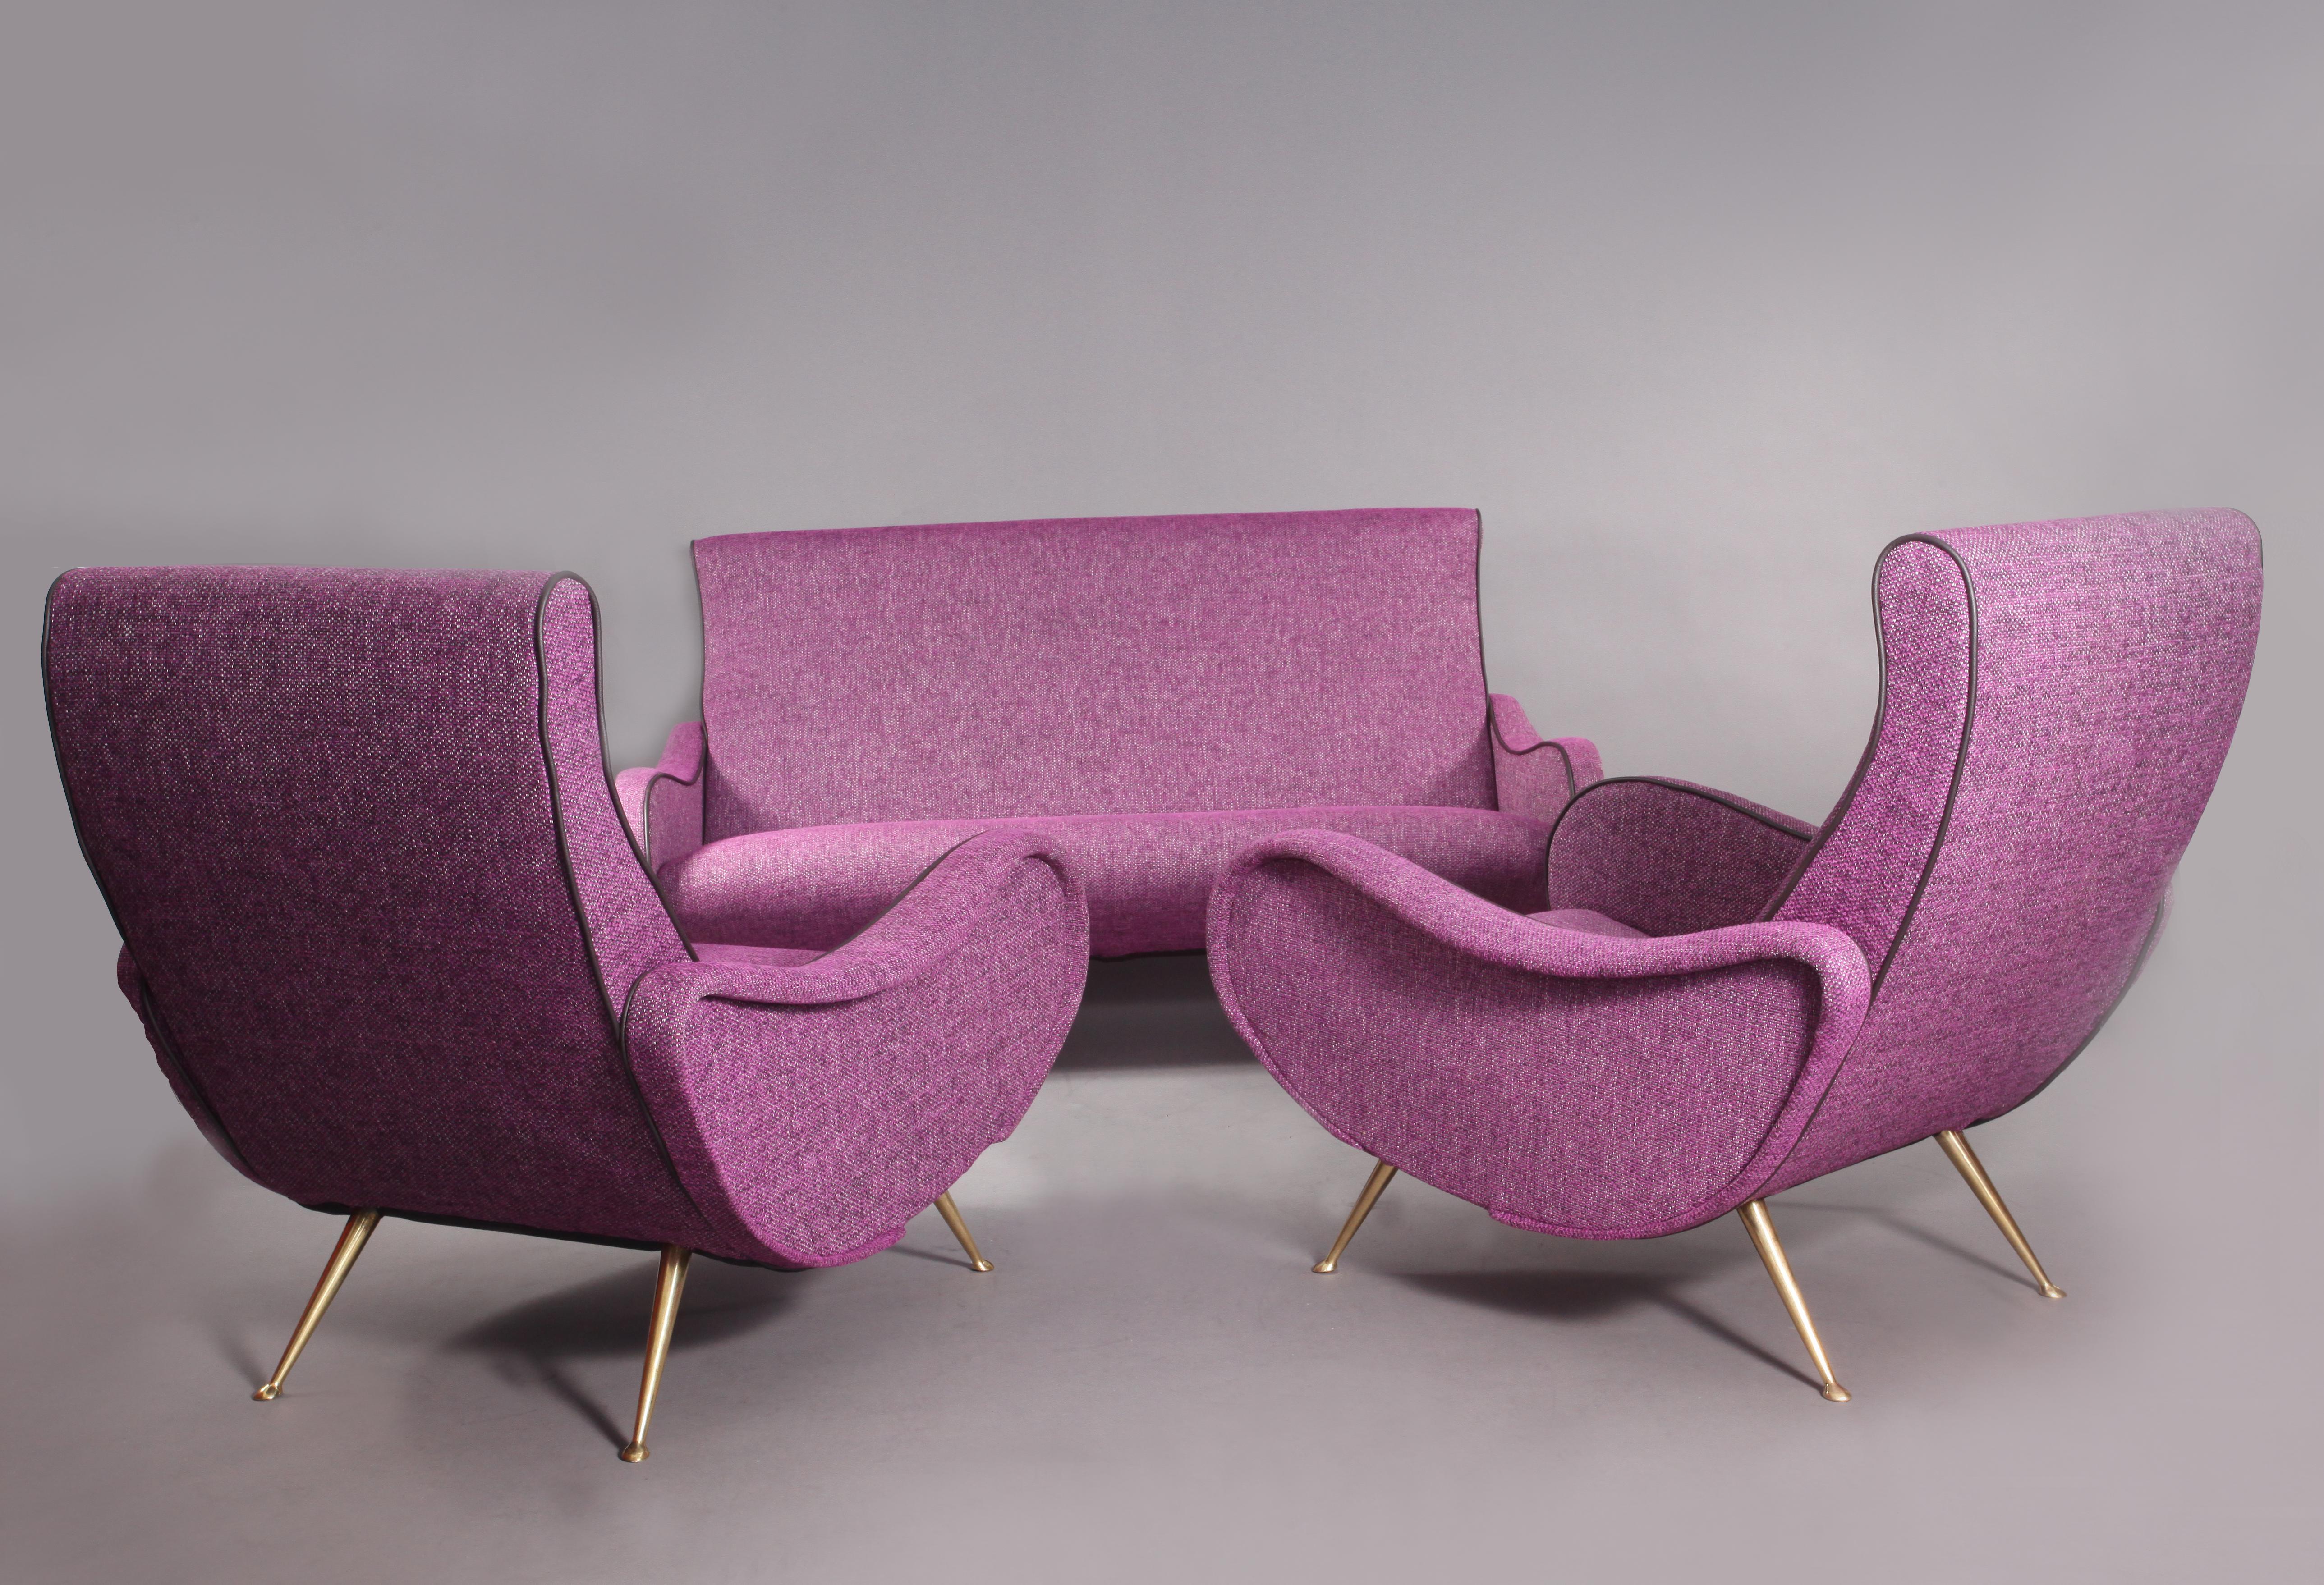 Two lady chairs with two-seat sofa
Marco Zanuso style 
Italy, 1950
purple fabric, brass legs
Measures: sofa: widht 151cm
 depht 80cm
 height 91cm.
 